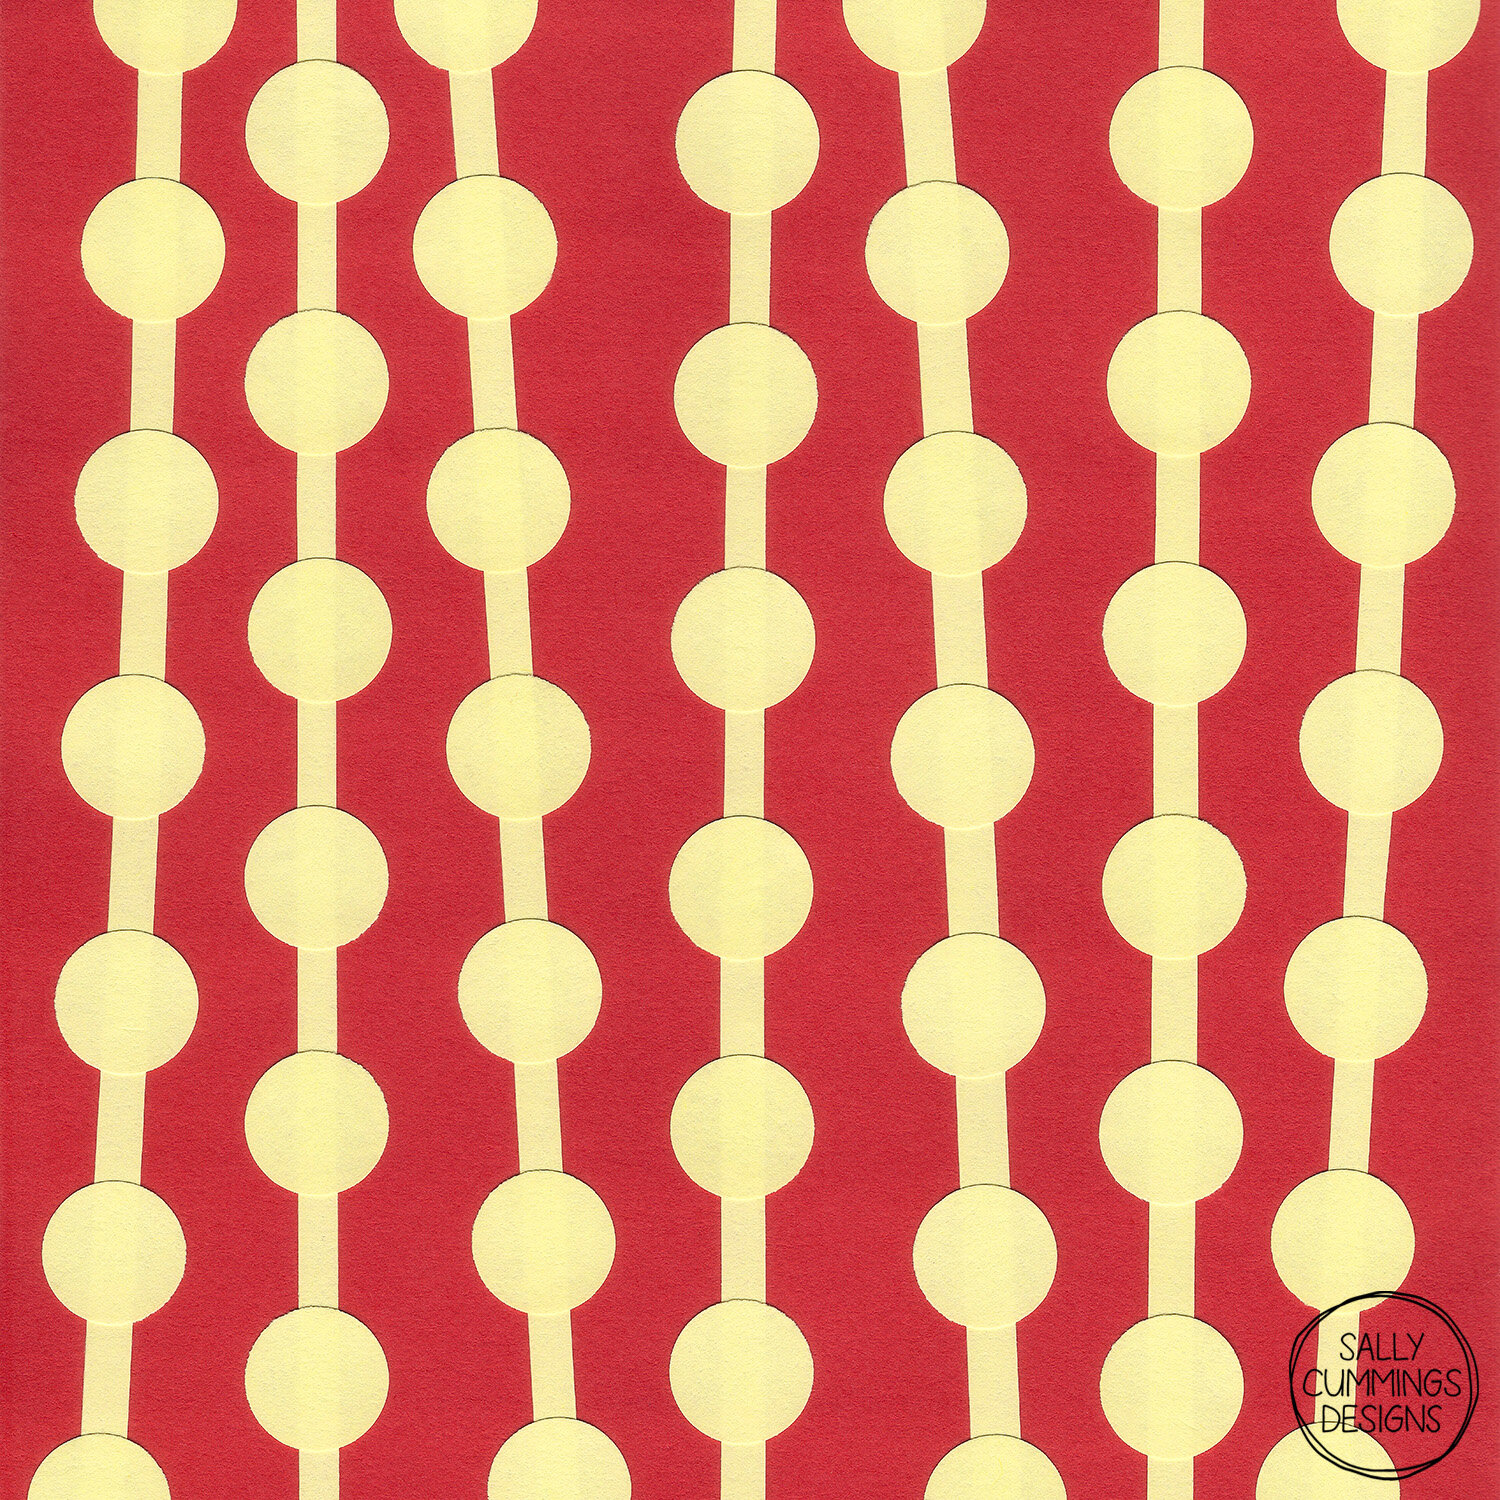 Sally Cummings Designs - Bead Curtain Collage Red and Yellow